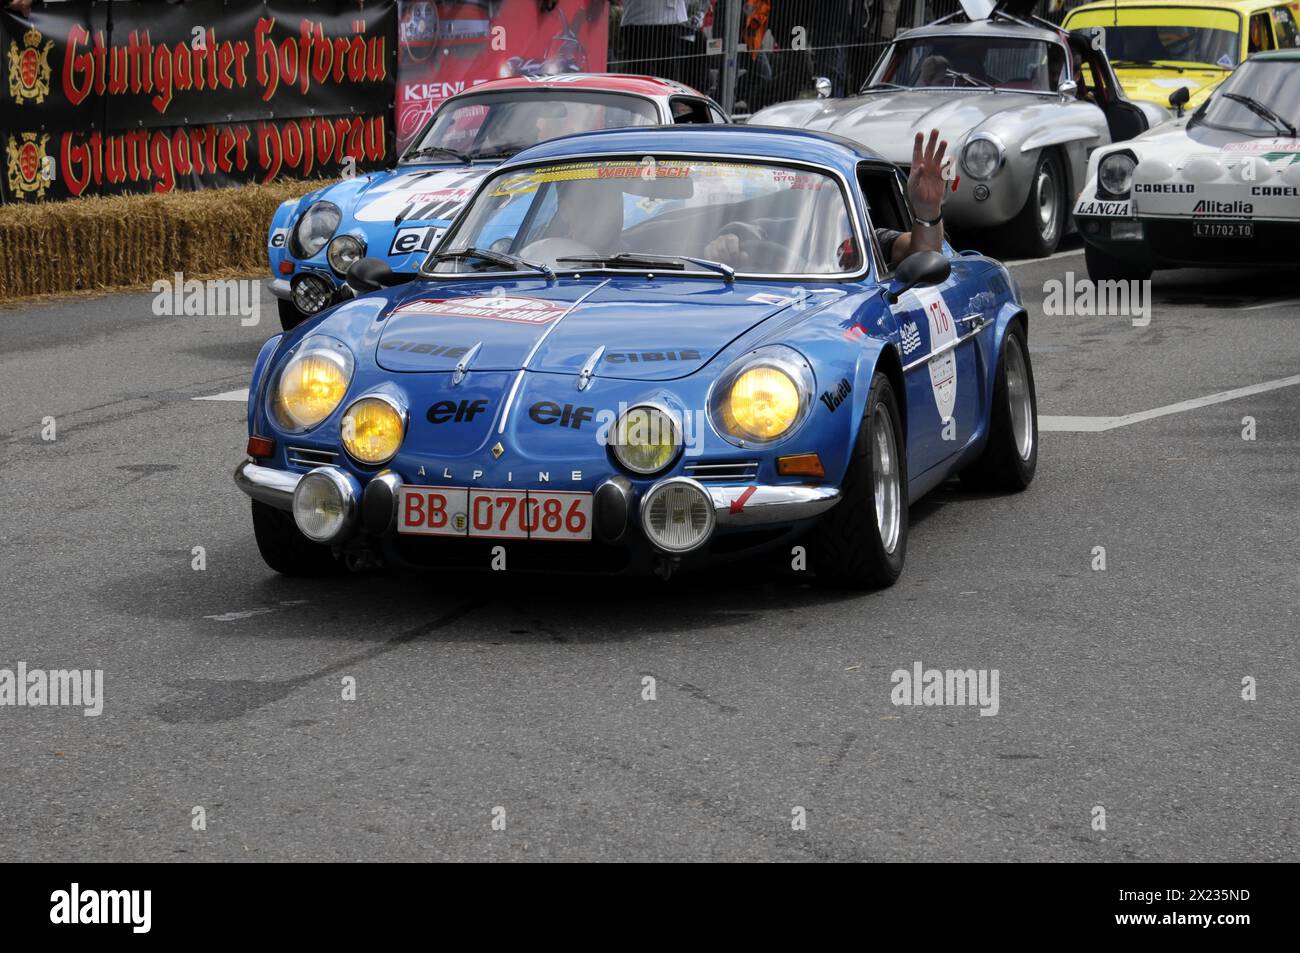 A blue Renault Alpine with the number 8 at a classic car race meeting, SOLITUDE REVIVAL 2011, Stuttgart, Baden-Wuerttemberg, Germany Stock Photo